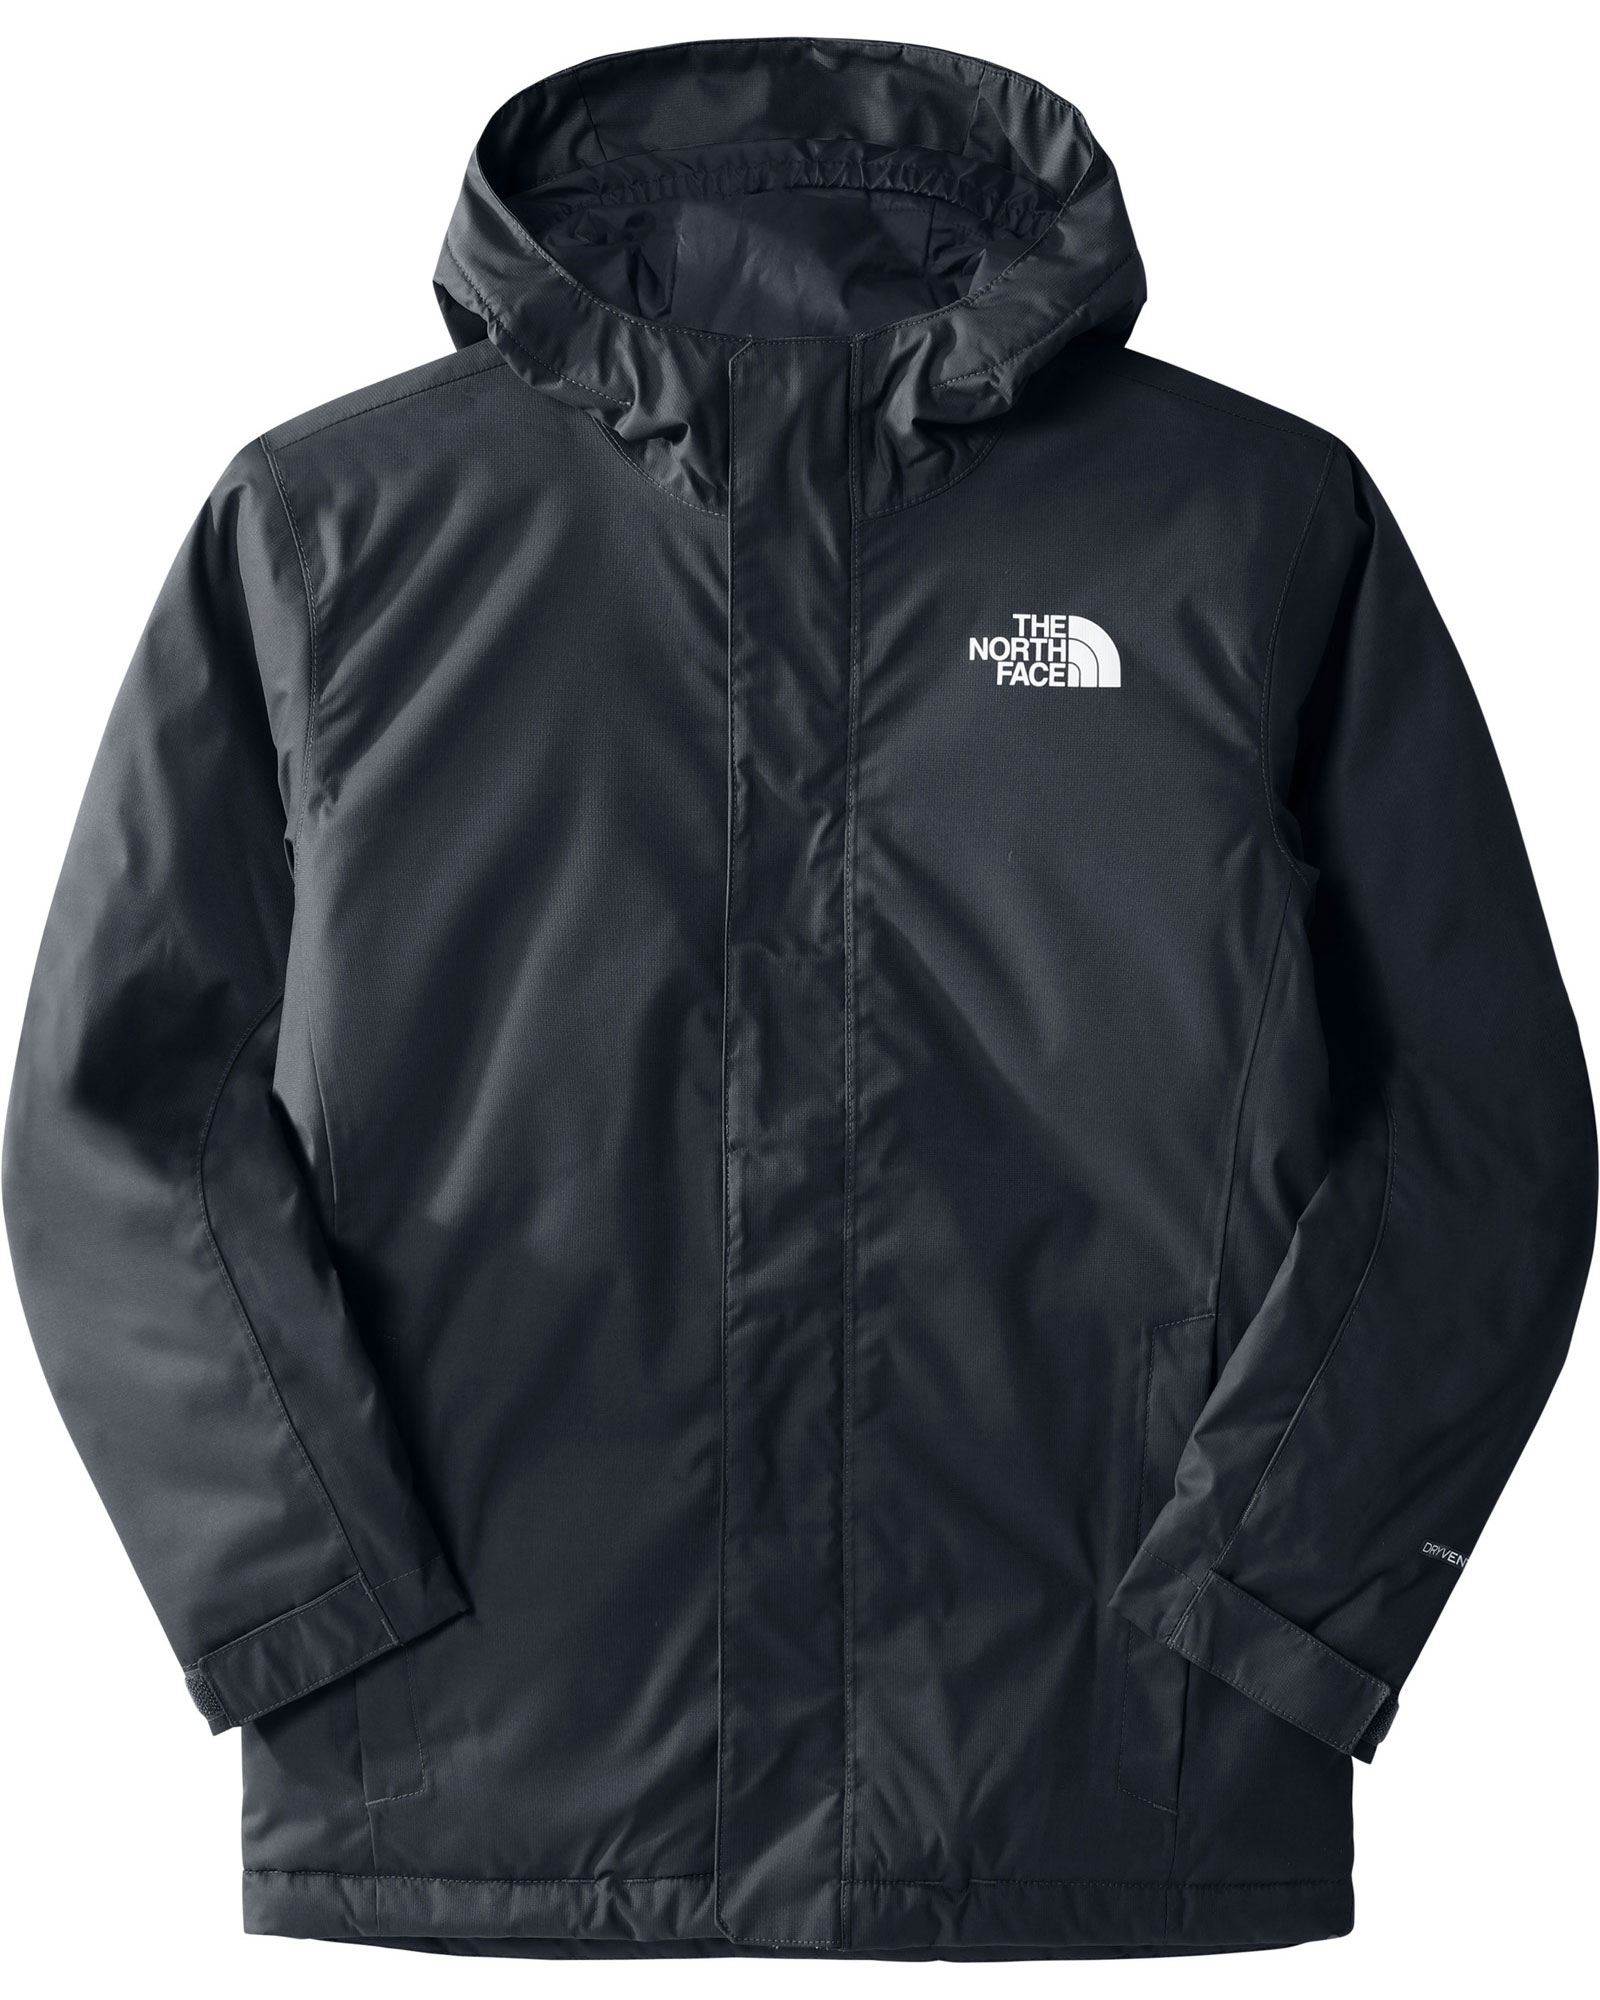 The North Face Youth Snowquest DryVent Jacket - TNF Black M